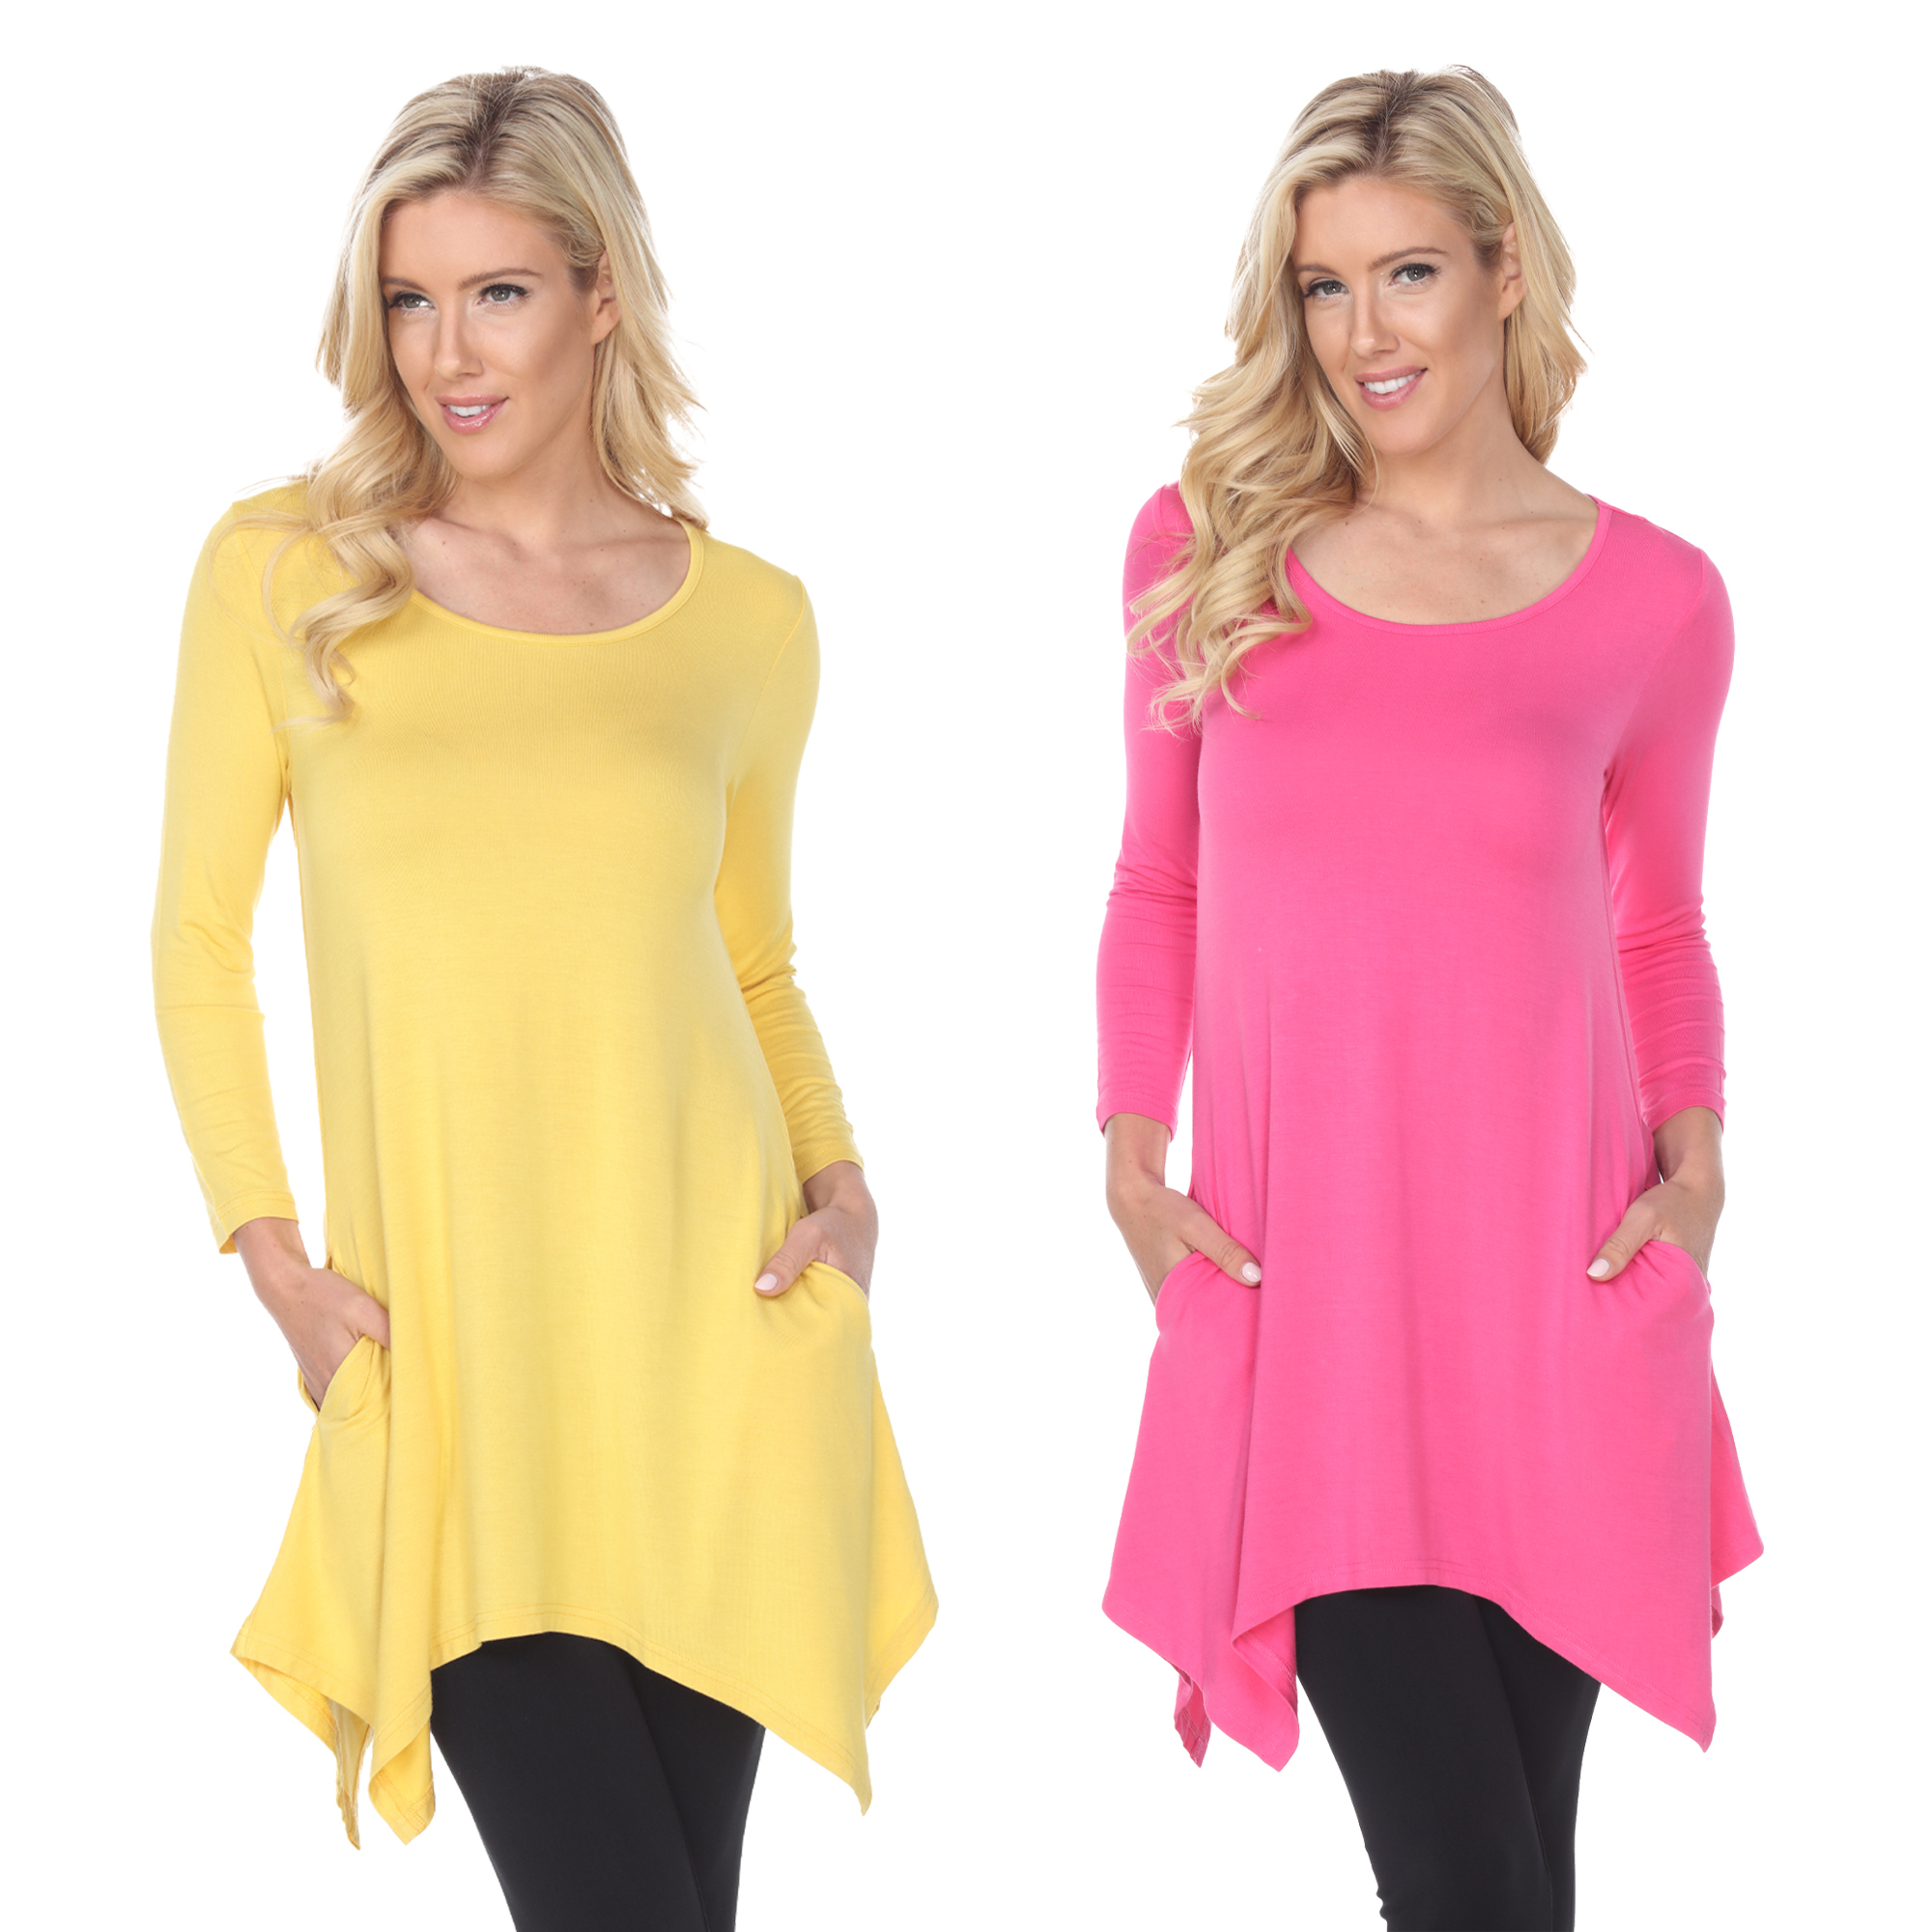 White Mark Women's Pack Of 2 Yellow Tunic Top - Yellow, Coral, X-Large